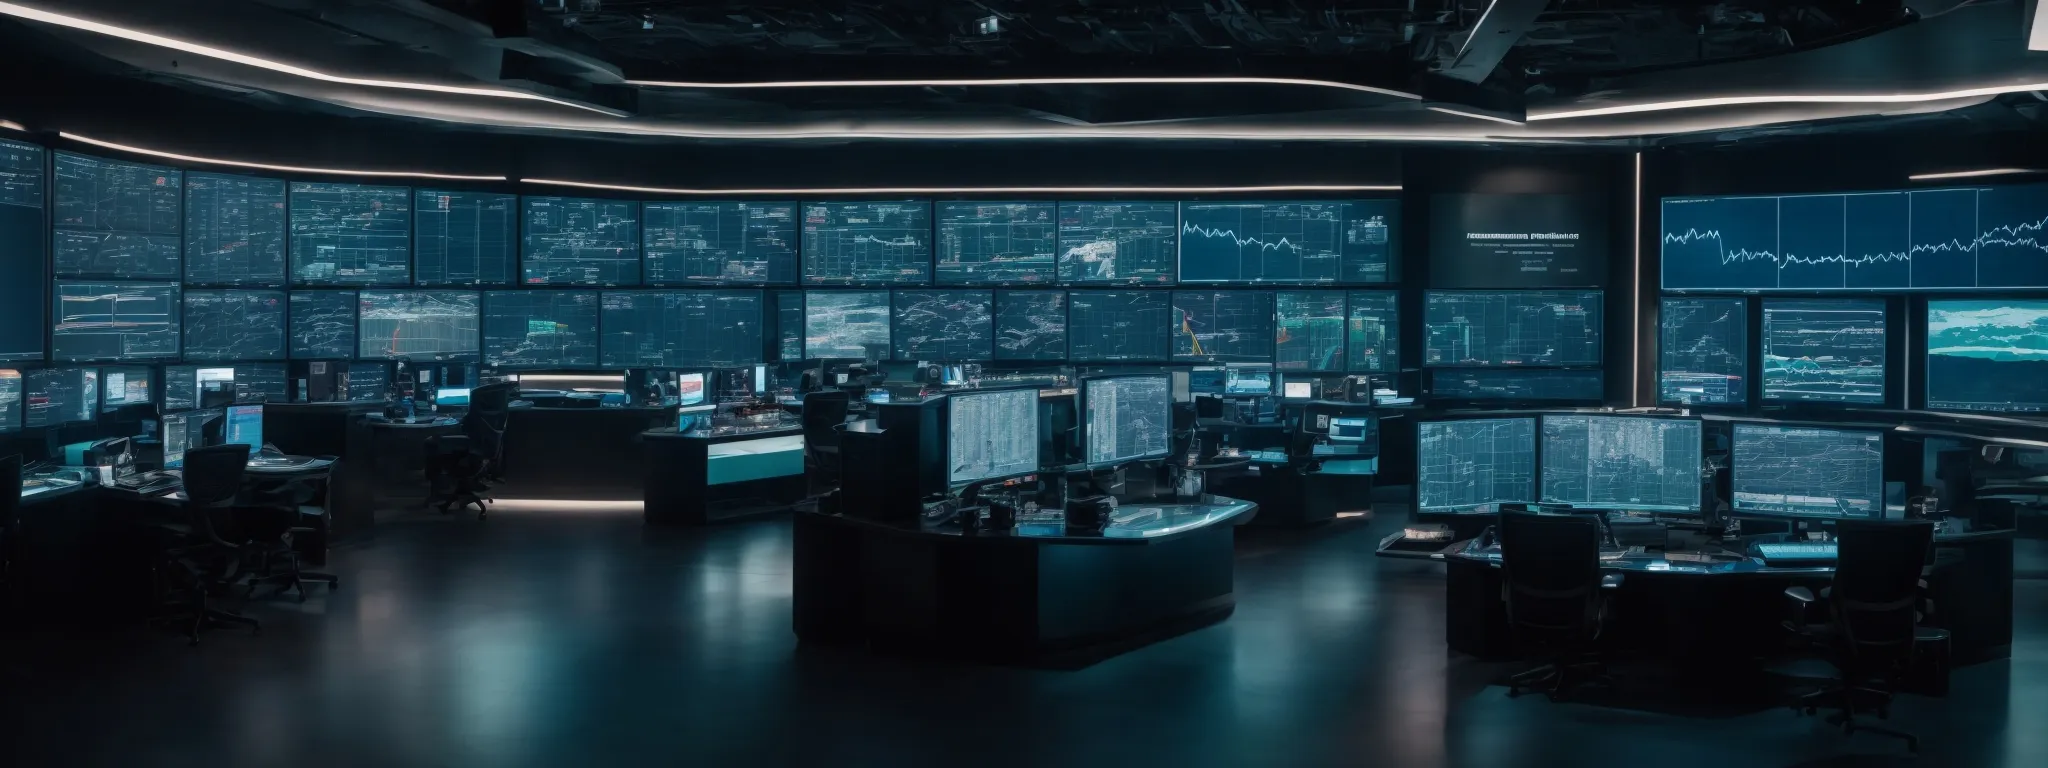 a futuristic command center with large screens displaying complex data analytics and interactive seo dashboards.